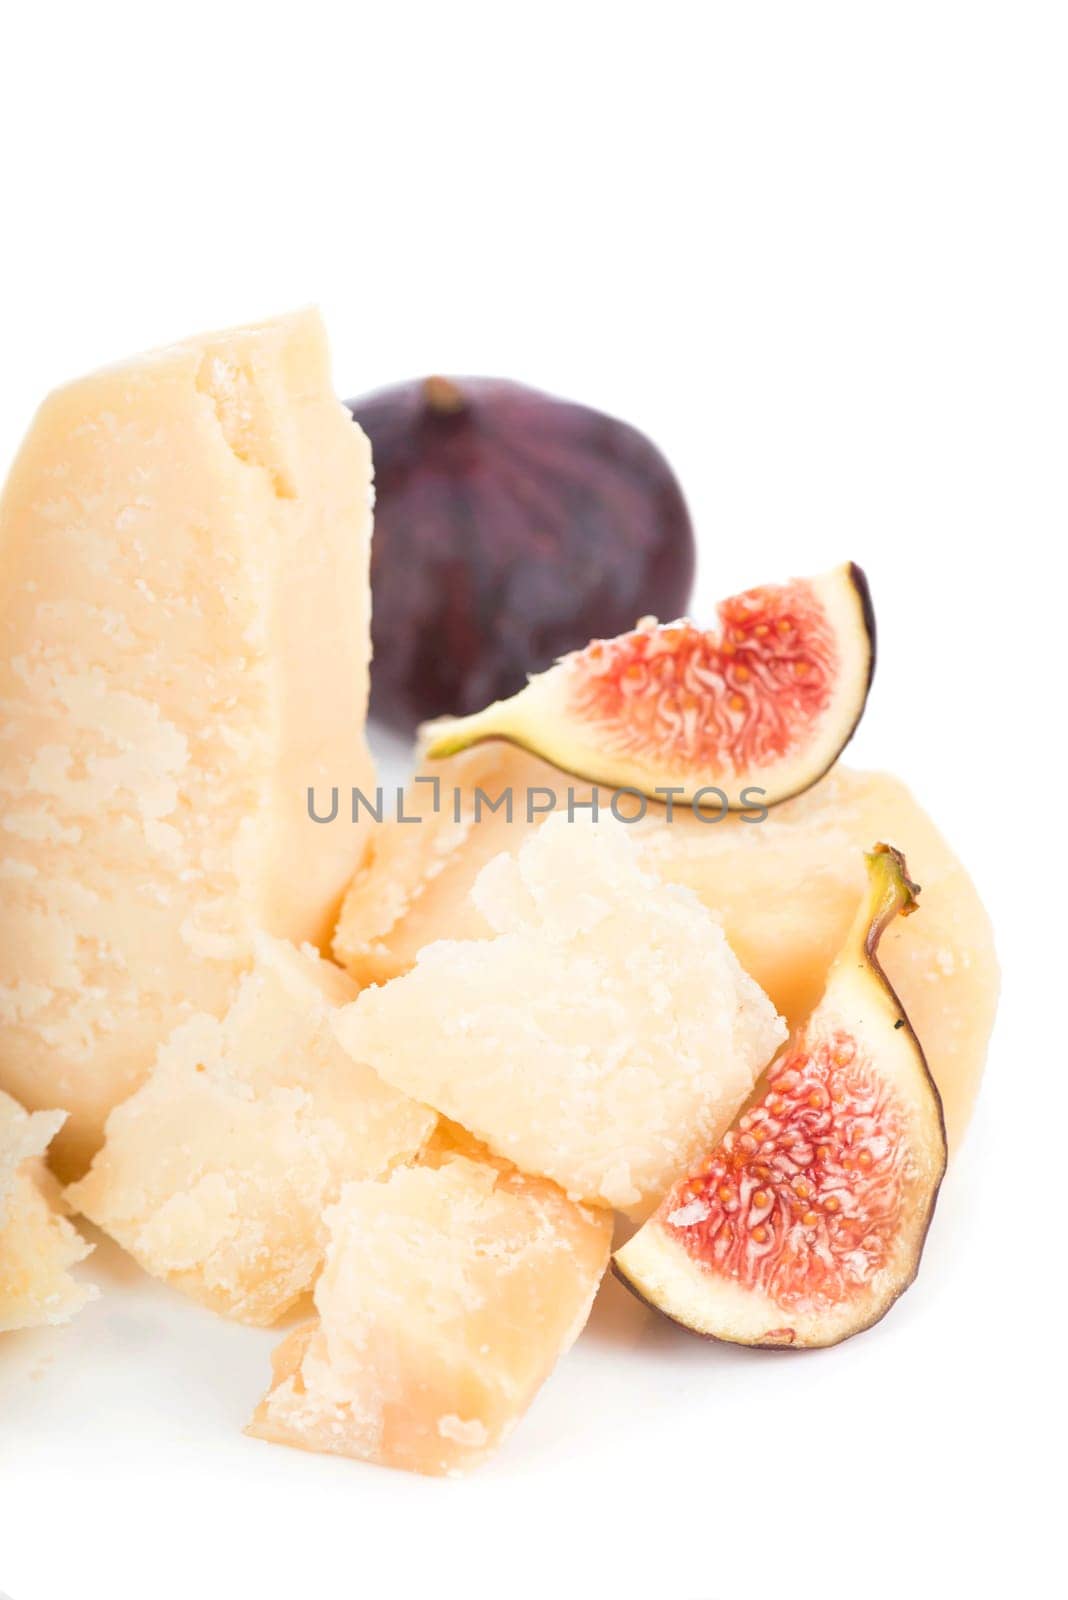 Parmesan cheese and blue figs isolated on a white backgroun. View from above